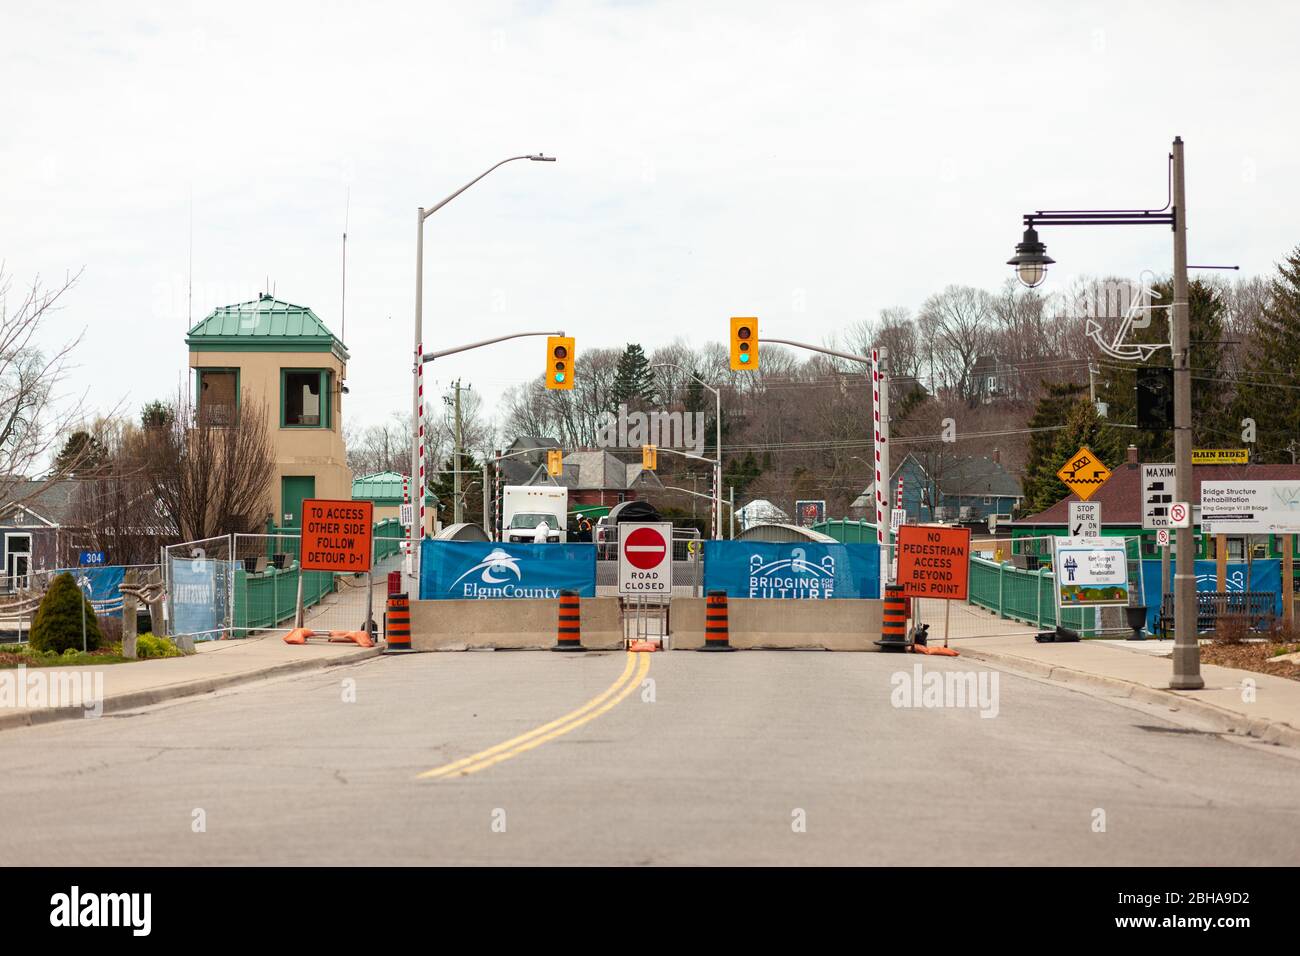 The King George VI lift bridge spans Kettle Creek where it bisects Port Stanley. It will be closed from. April 2020 to March 2021 for improvements, as Stock Photo